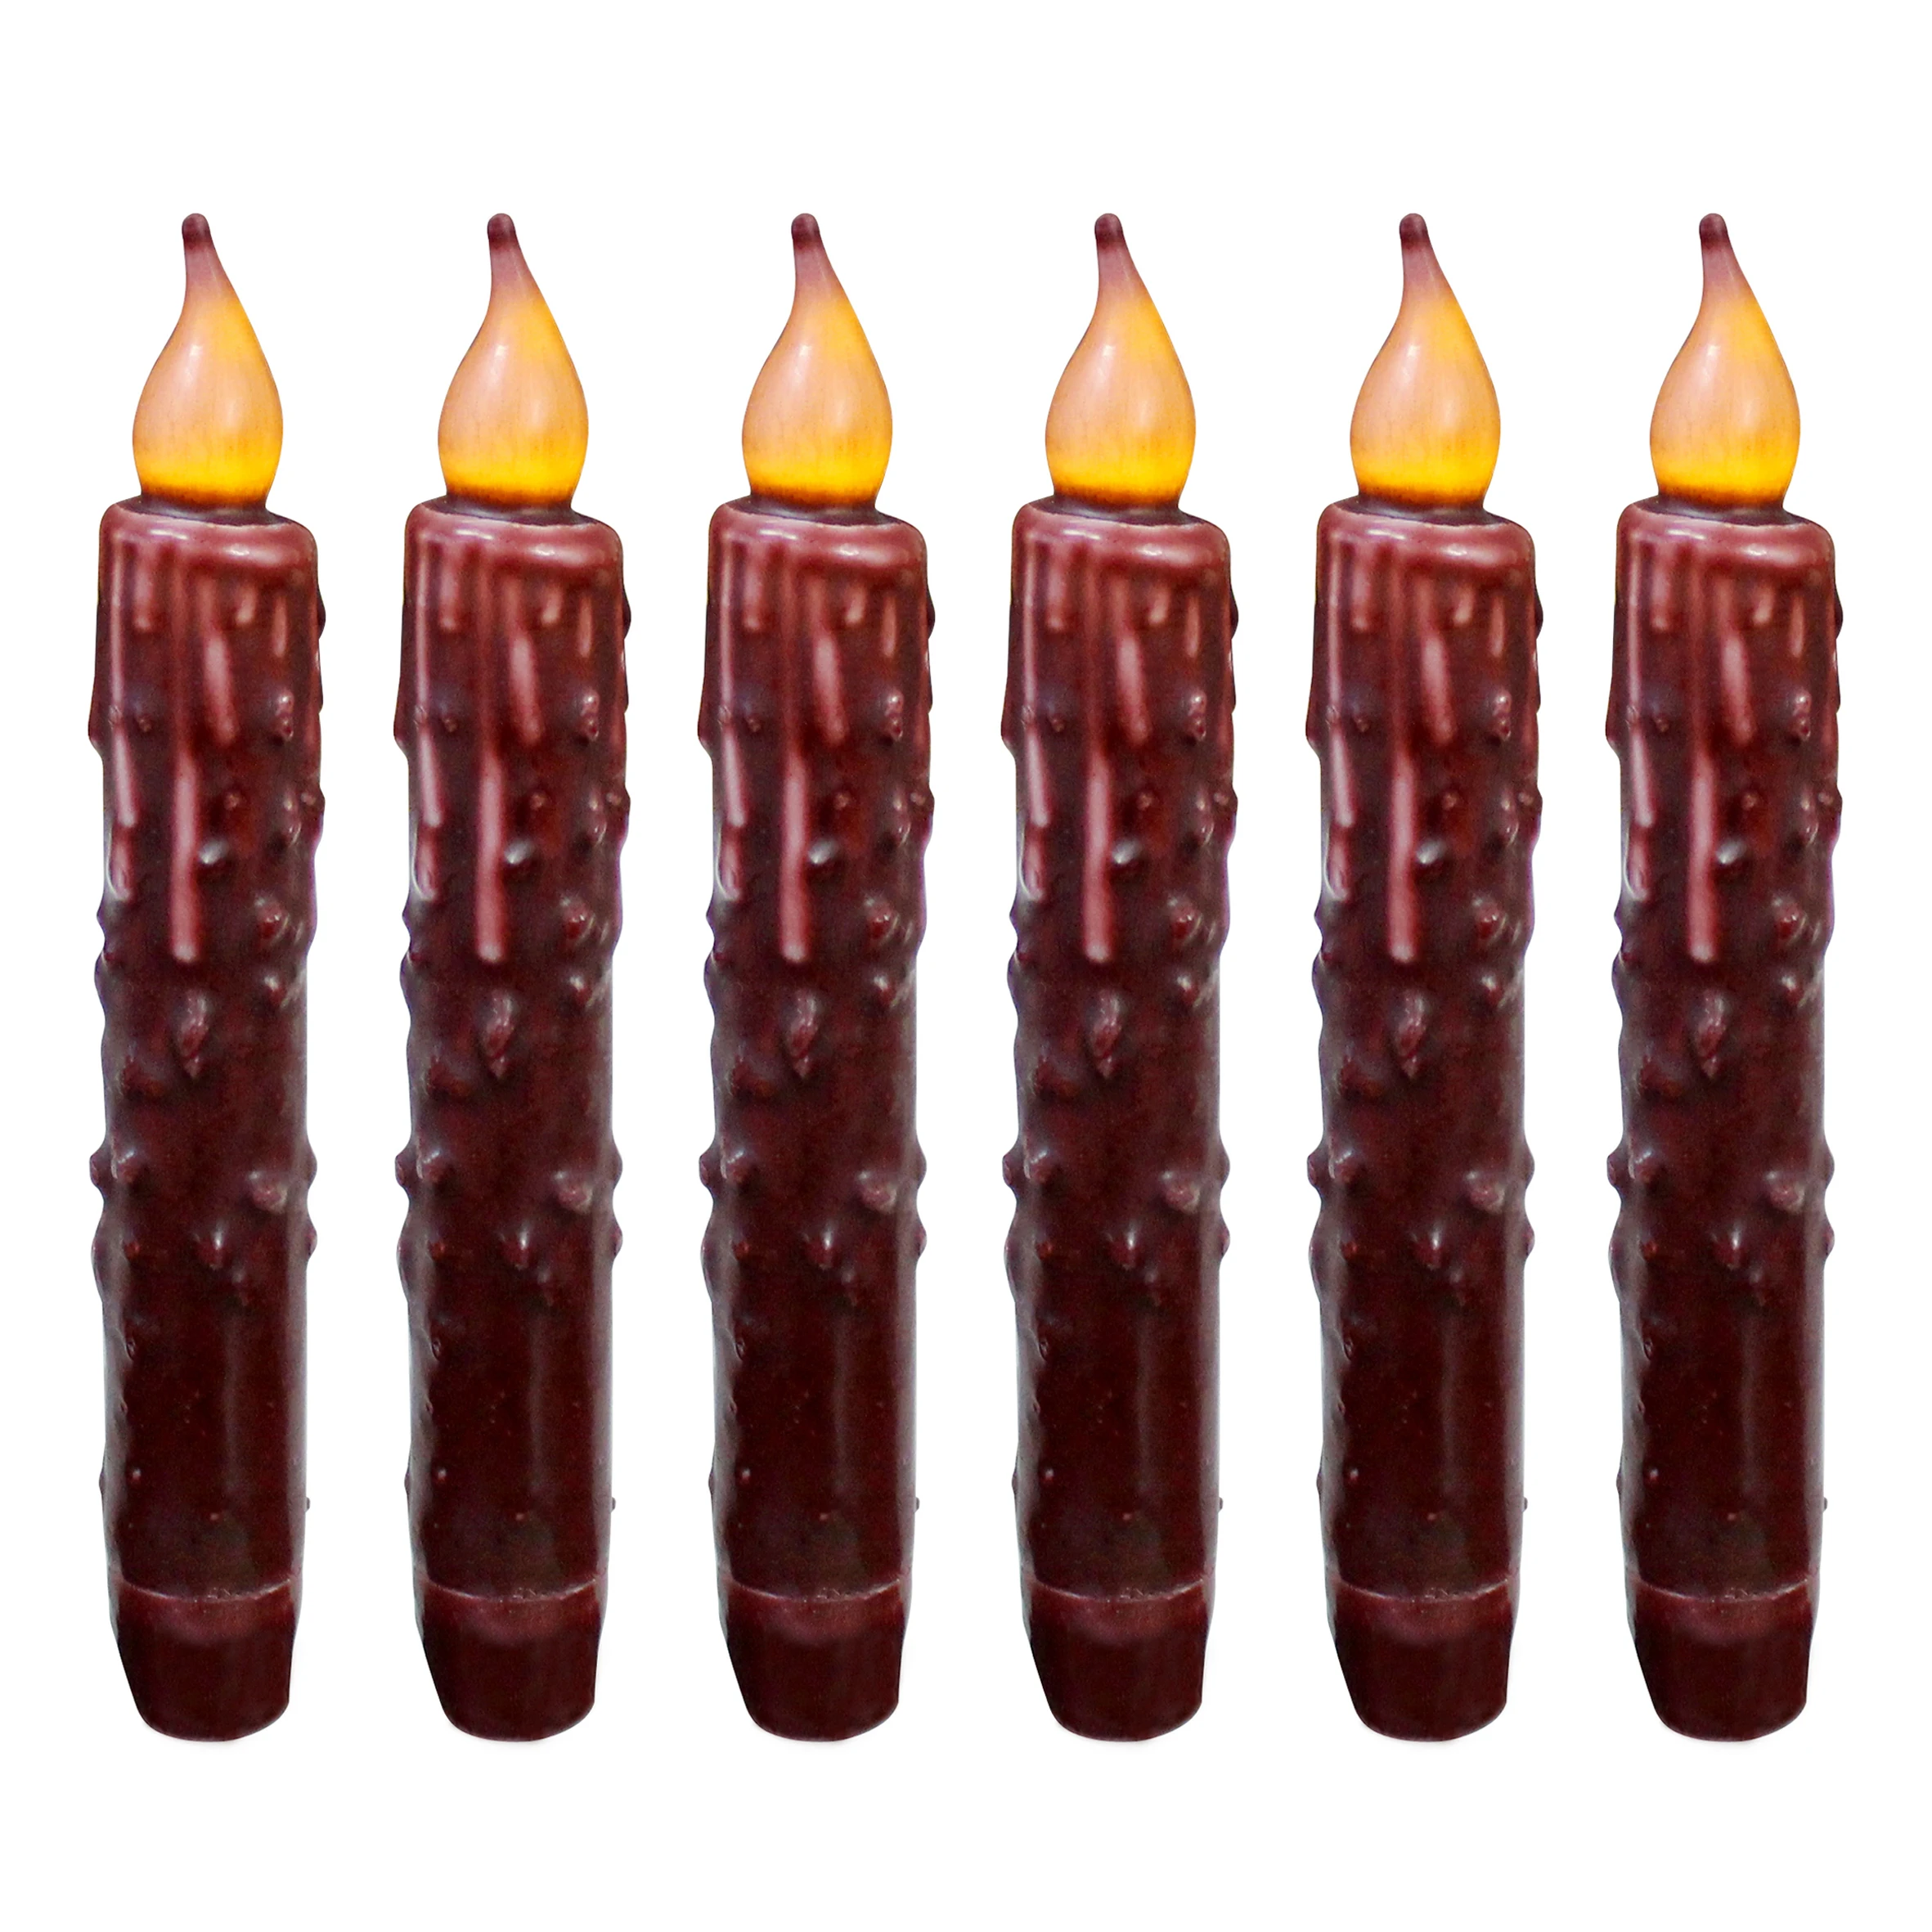 1 Pcs LED Taper Battery Operated Flameless Candle Lamp Dipped Wax Flicker Light 